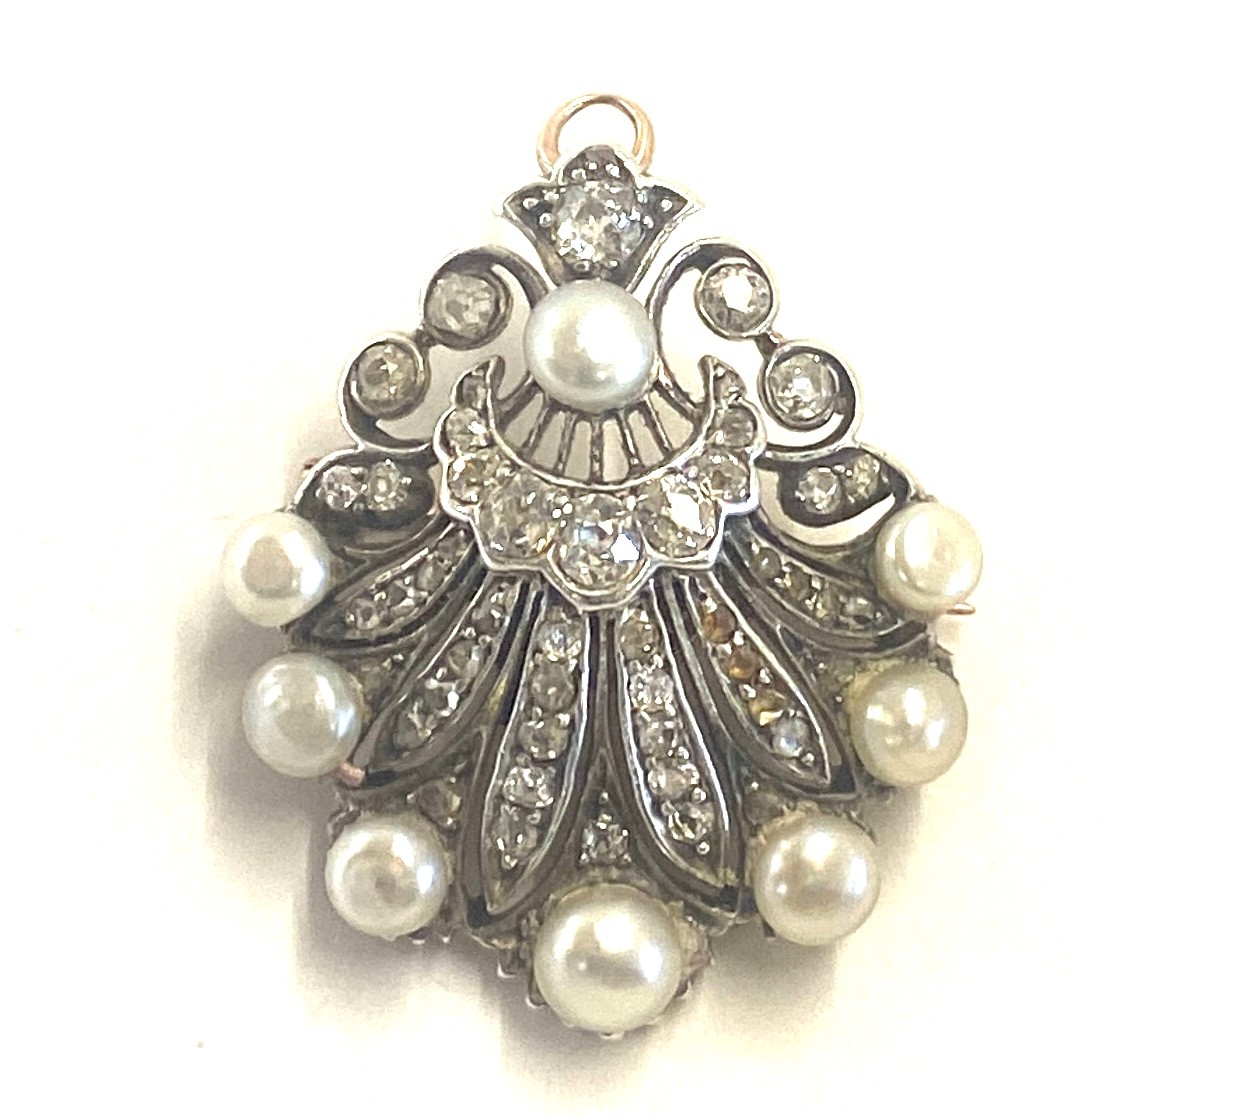 Antique natural pearl and diamond gold backed brooch/ pendant. Measures 4cm tall 3 cm wide.